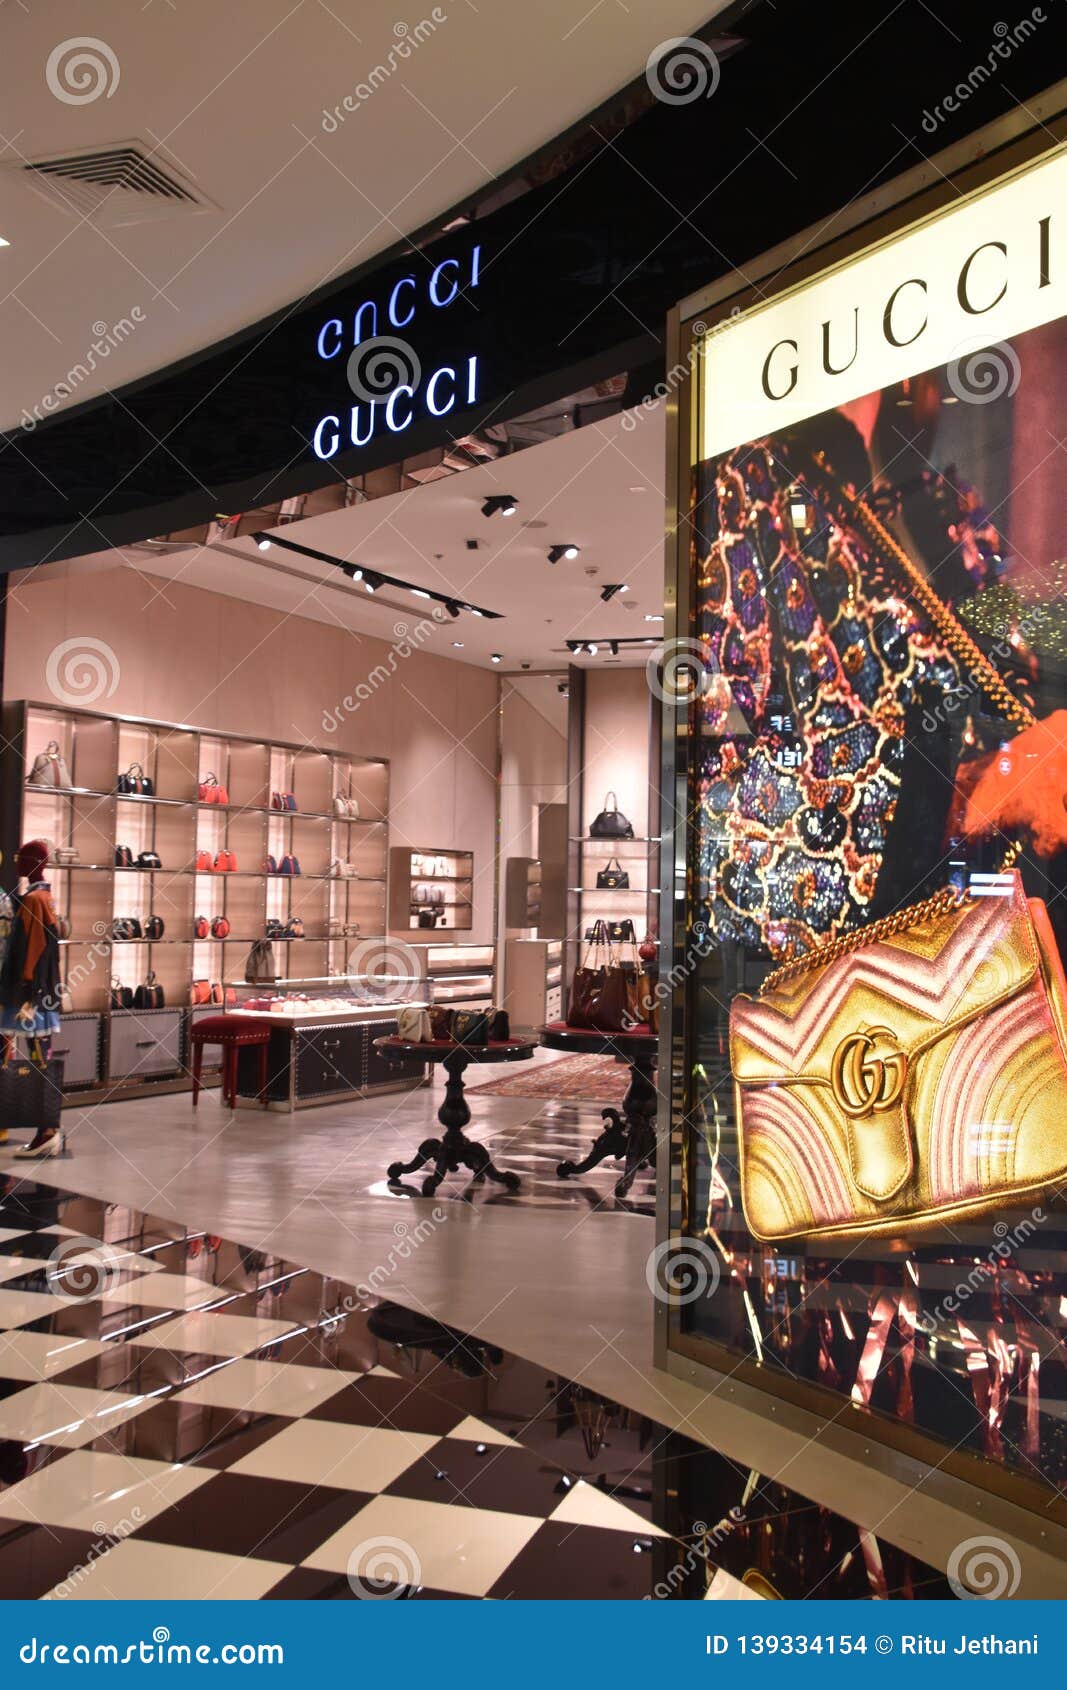 largest gucci store in the world